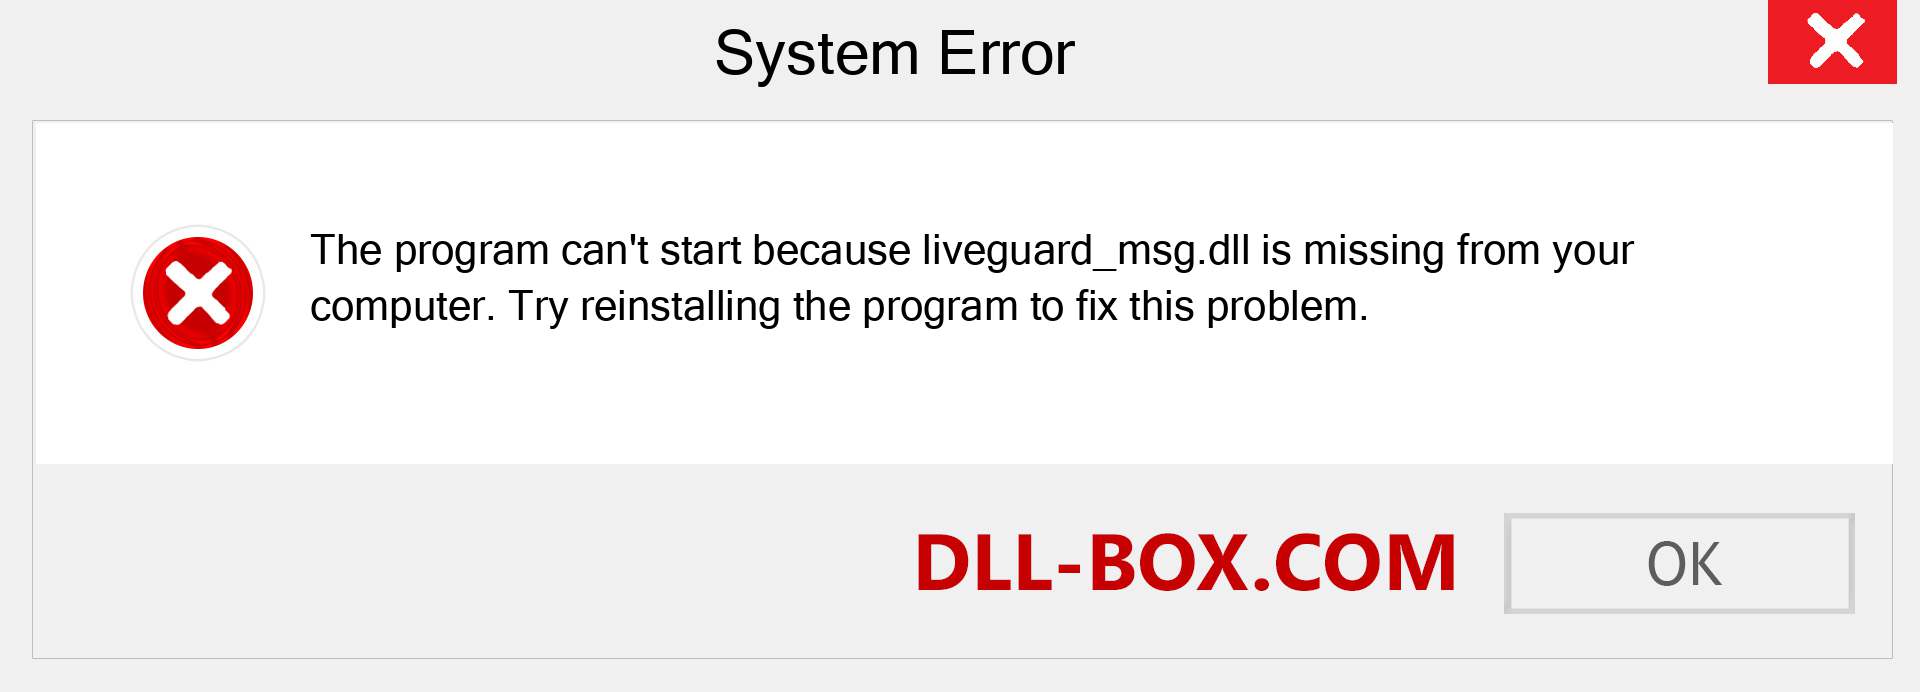  liveguard_msg.dll file is missing?. Download for Windows 7, 8, 10 - Fix  liveguard_msg dll Missing Error on Windows, photos, images